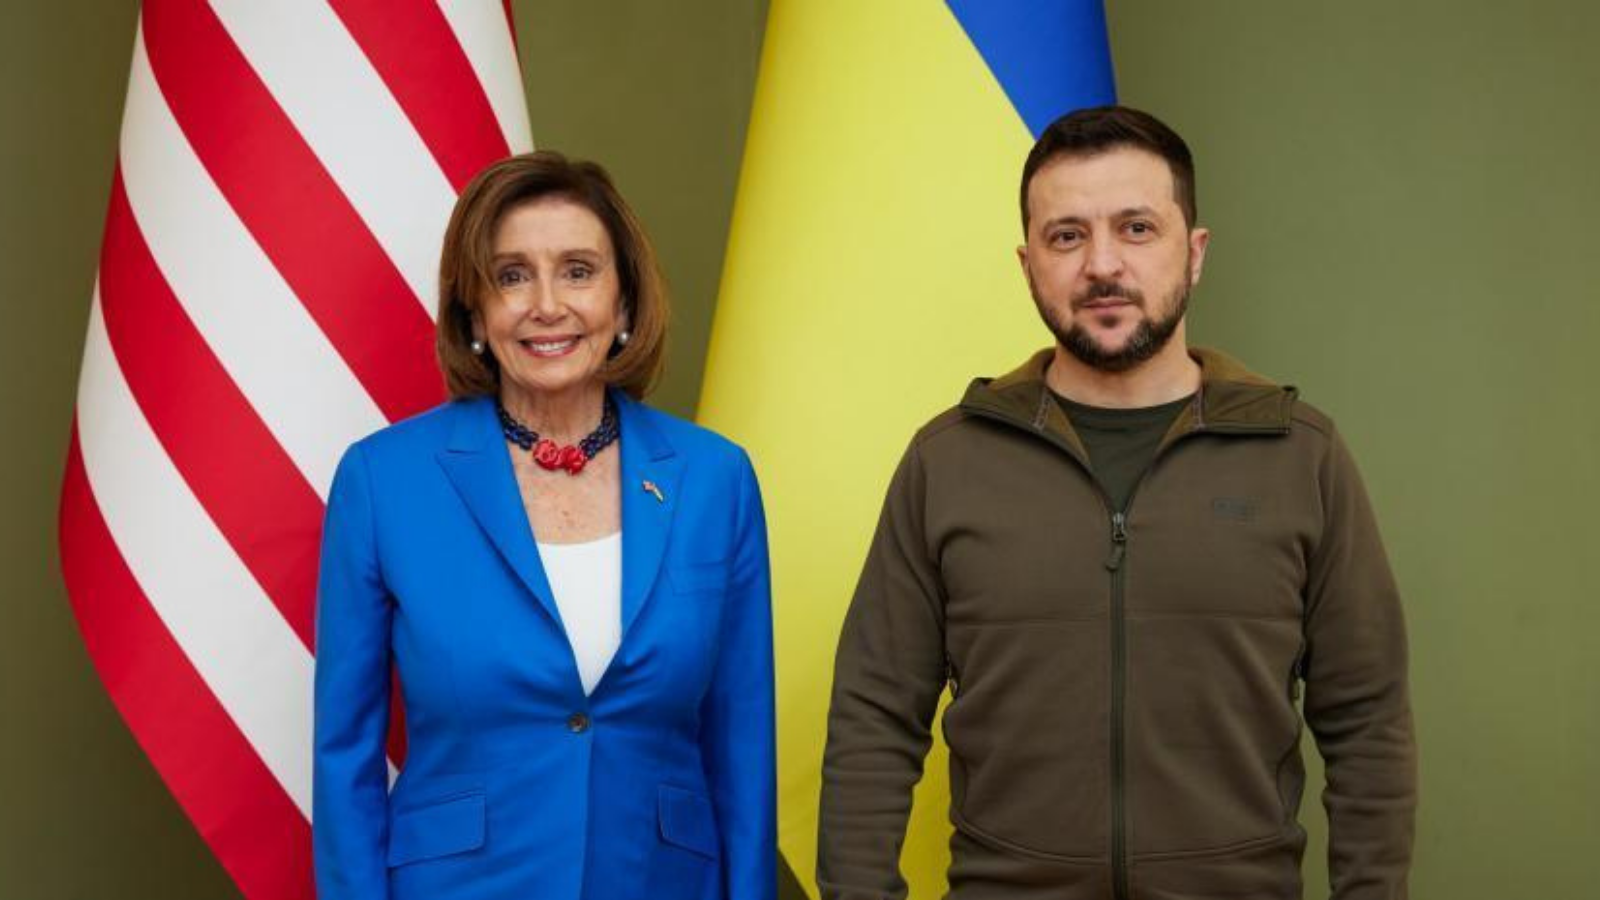 Pelosi affirms that the US will support Ukraine "until victory"